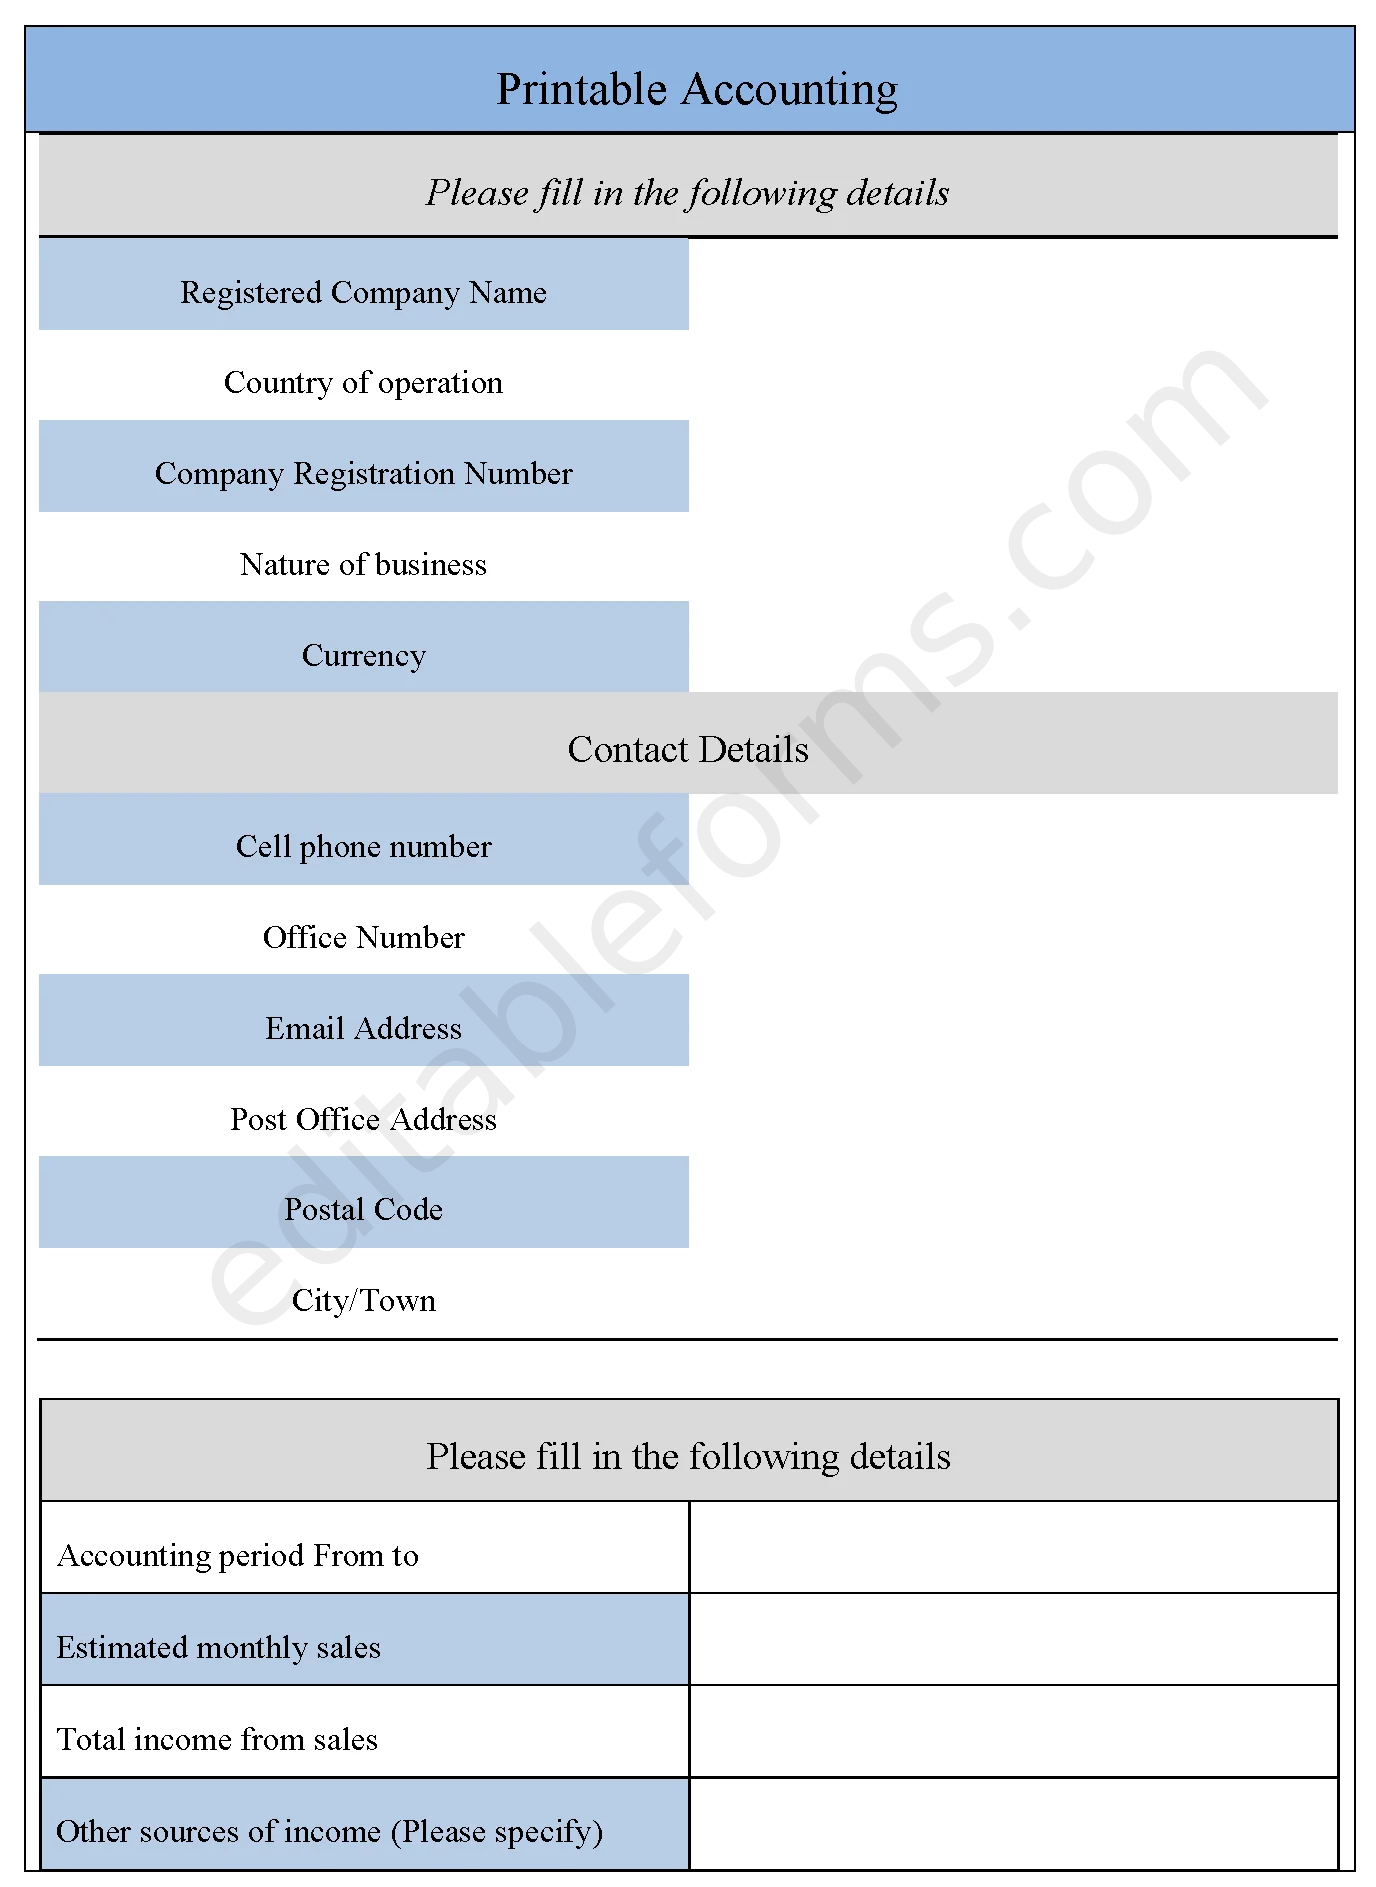 Printable Accounting Fillable PDF Template